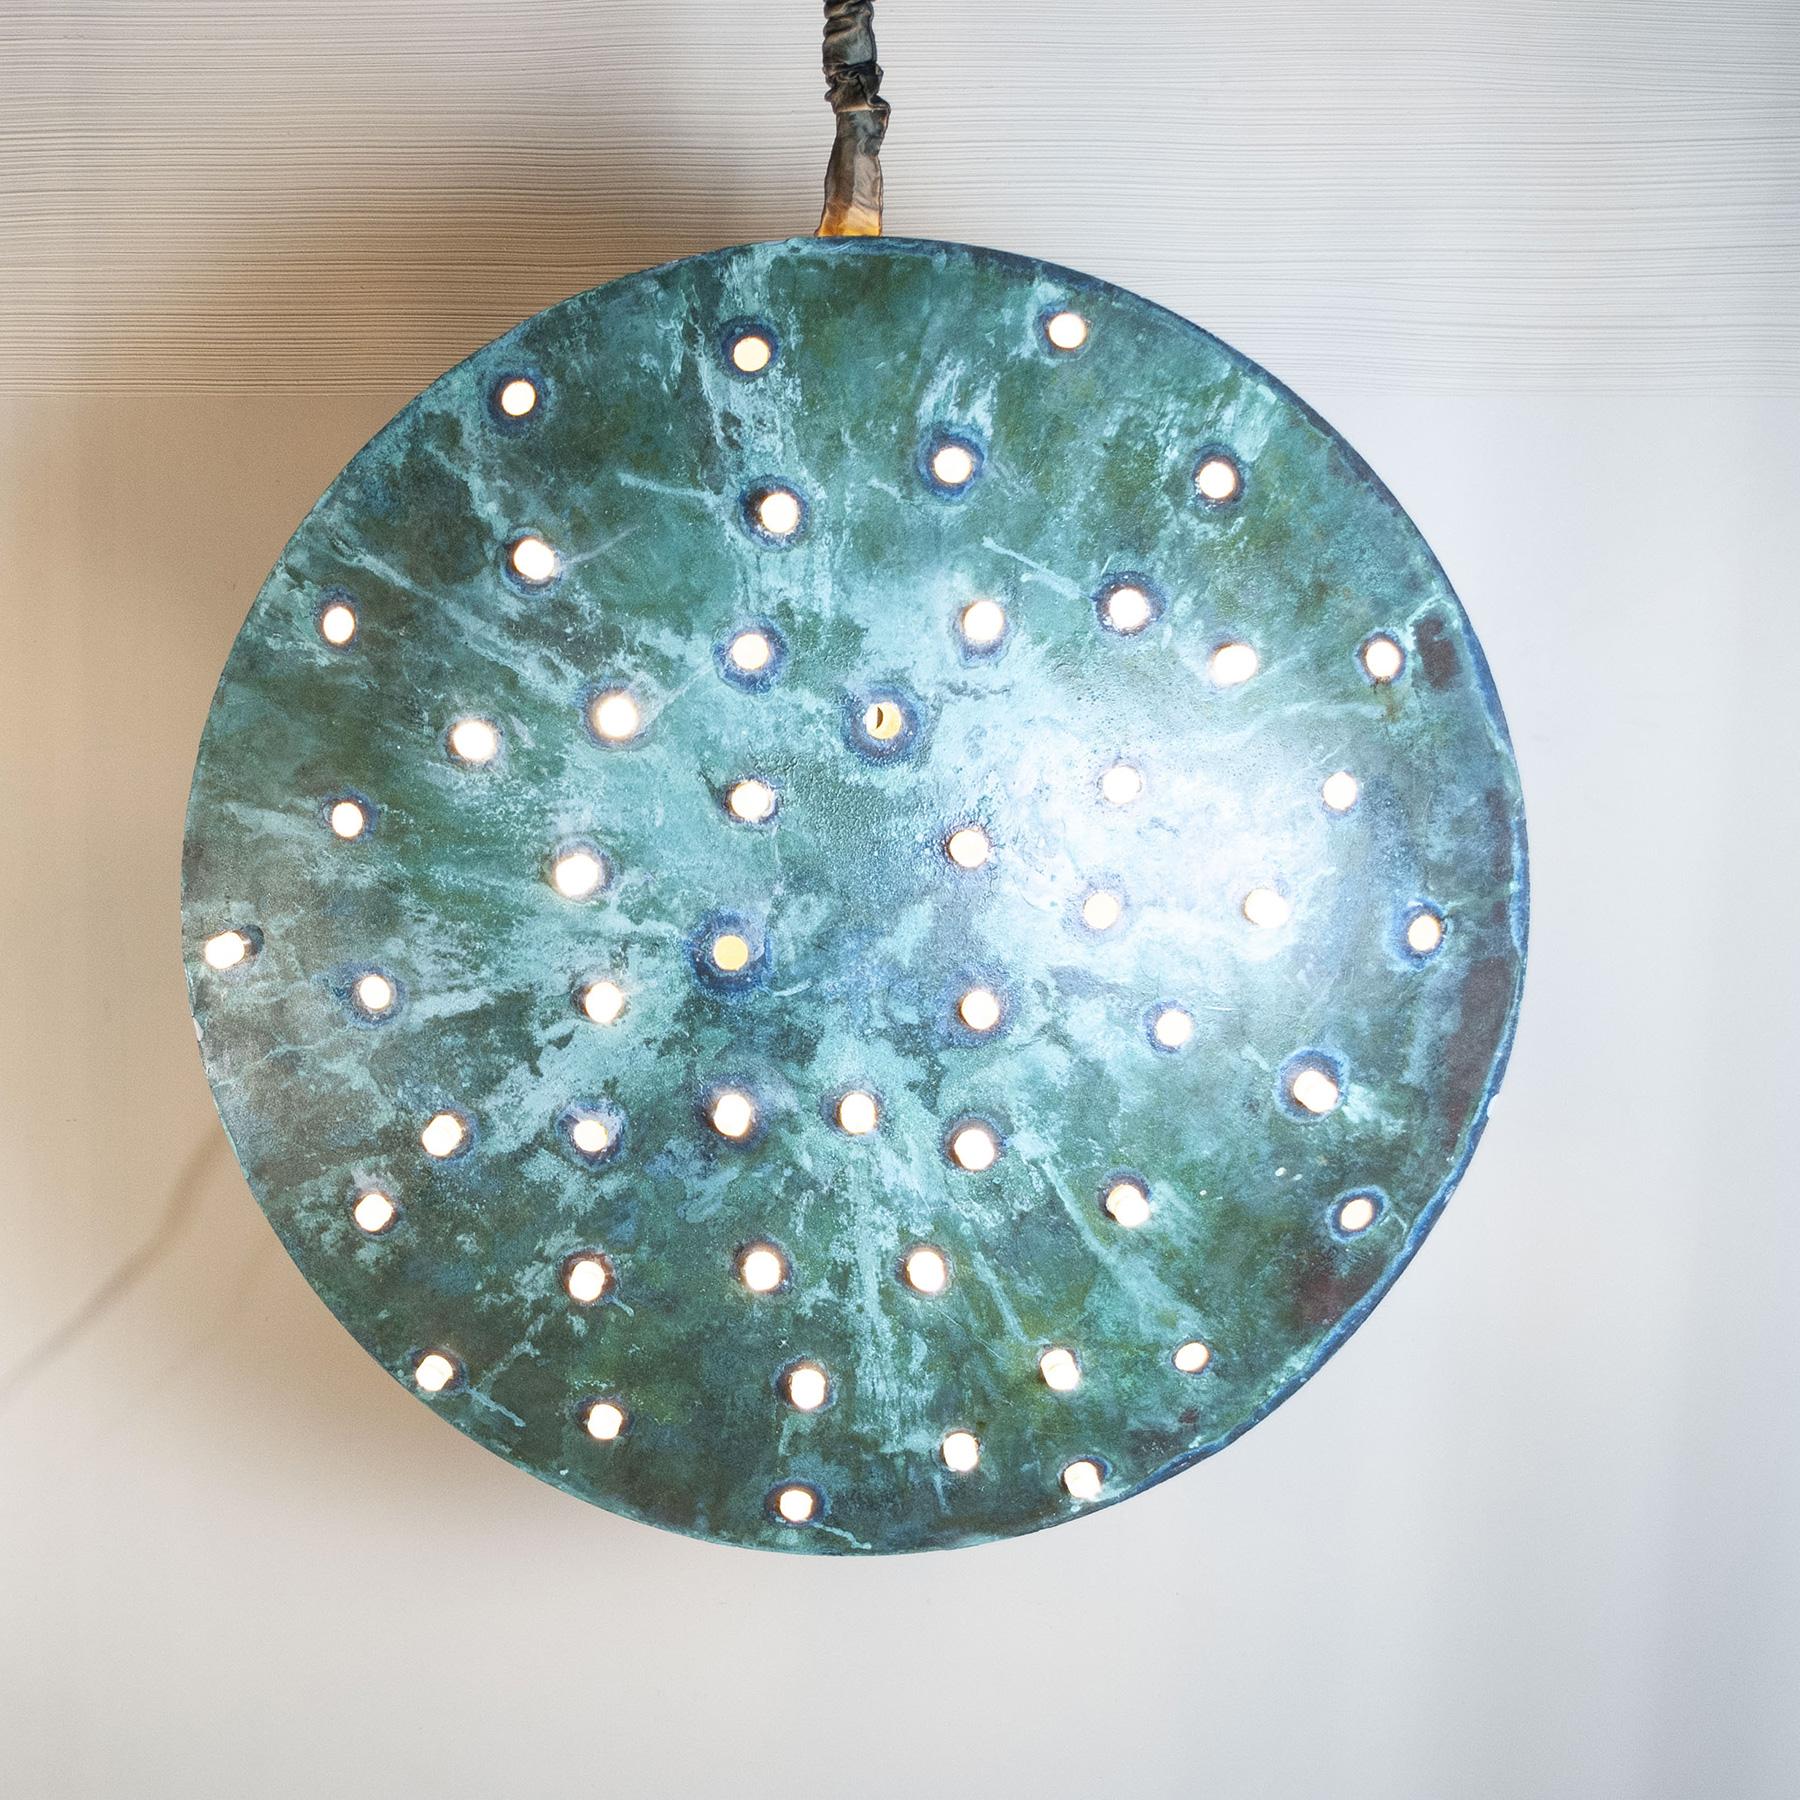 Gong Sculptural Chandelier by Cellule Creative Studio For Sale 3